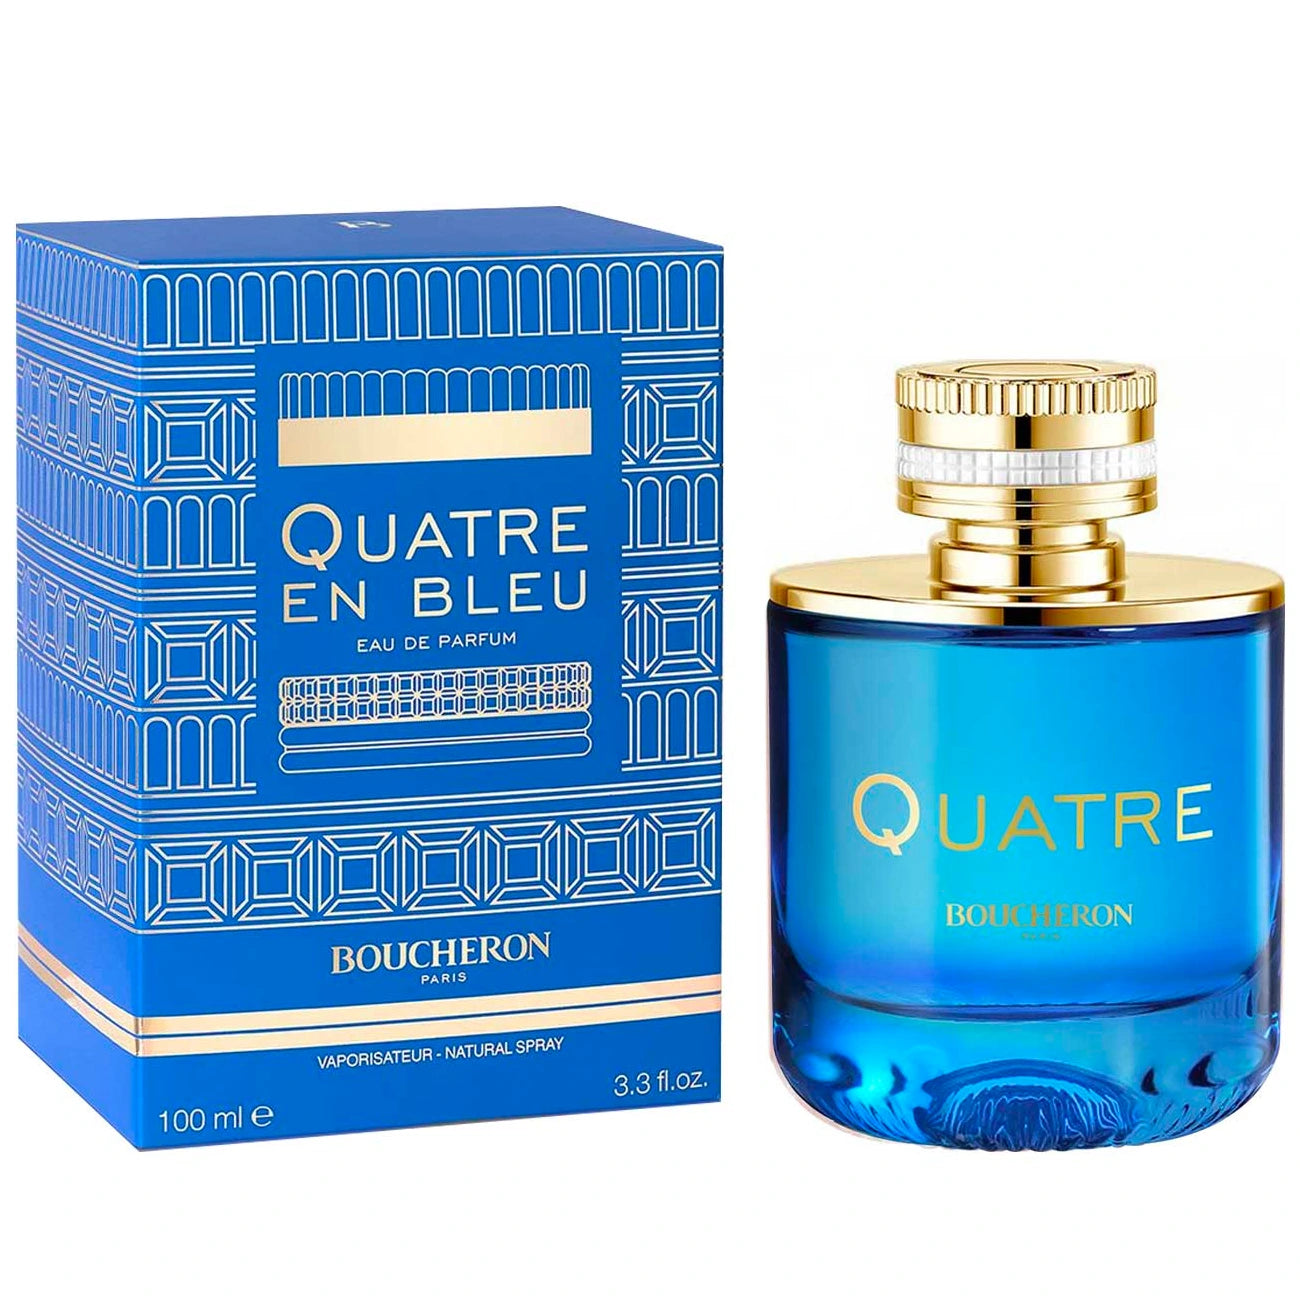 <p>Experience the luxurious and sophisticated scent of Boucheron Quatre En Bleu Eau de Parfum. With a zesty and sweet opening of Bergamot, Lemon, and Mandarin Orange, this fragrance uplifts and energizes. The heart of Egyptian Jasmine, Tuberose, and Rose adds a feminine touch, while the woody base notes of Akigalawood, Musk, and Sandalwood provide a sensual and elegant finish. Perfect for those who appreciate the finer things in life.</p>